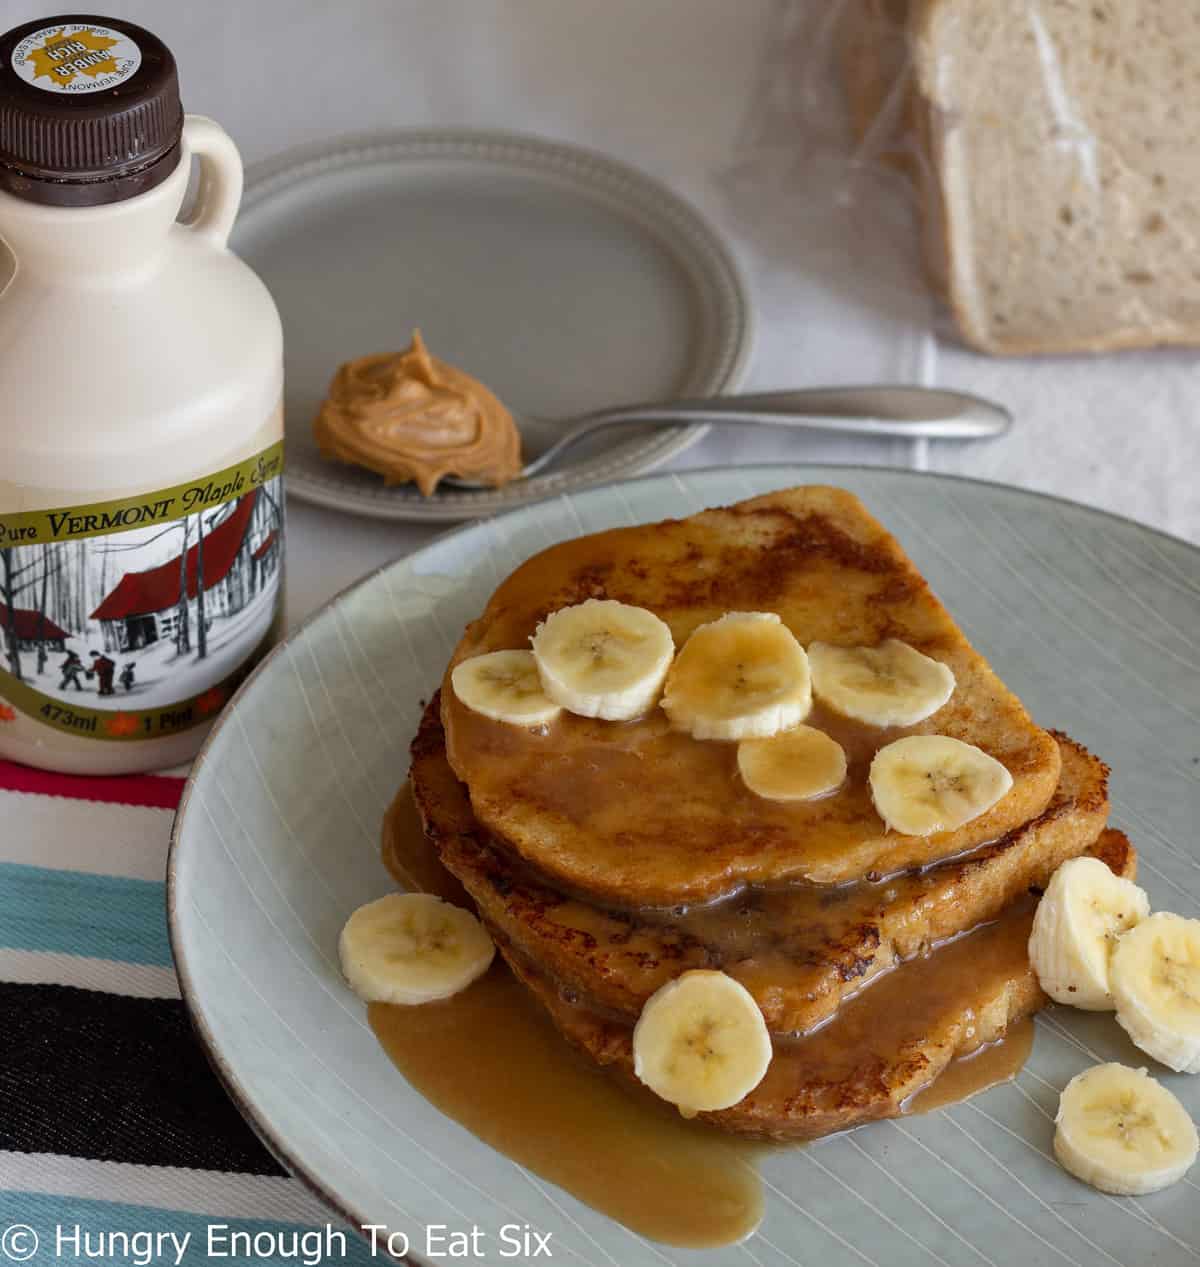 Jug of maple syrup with French toast and sliced bananas.